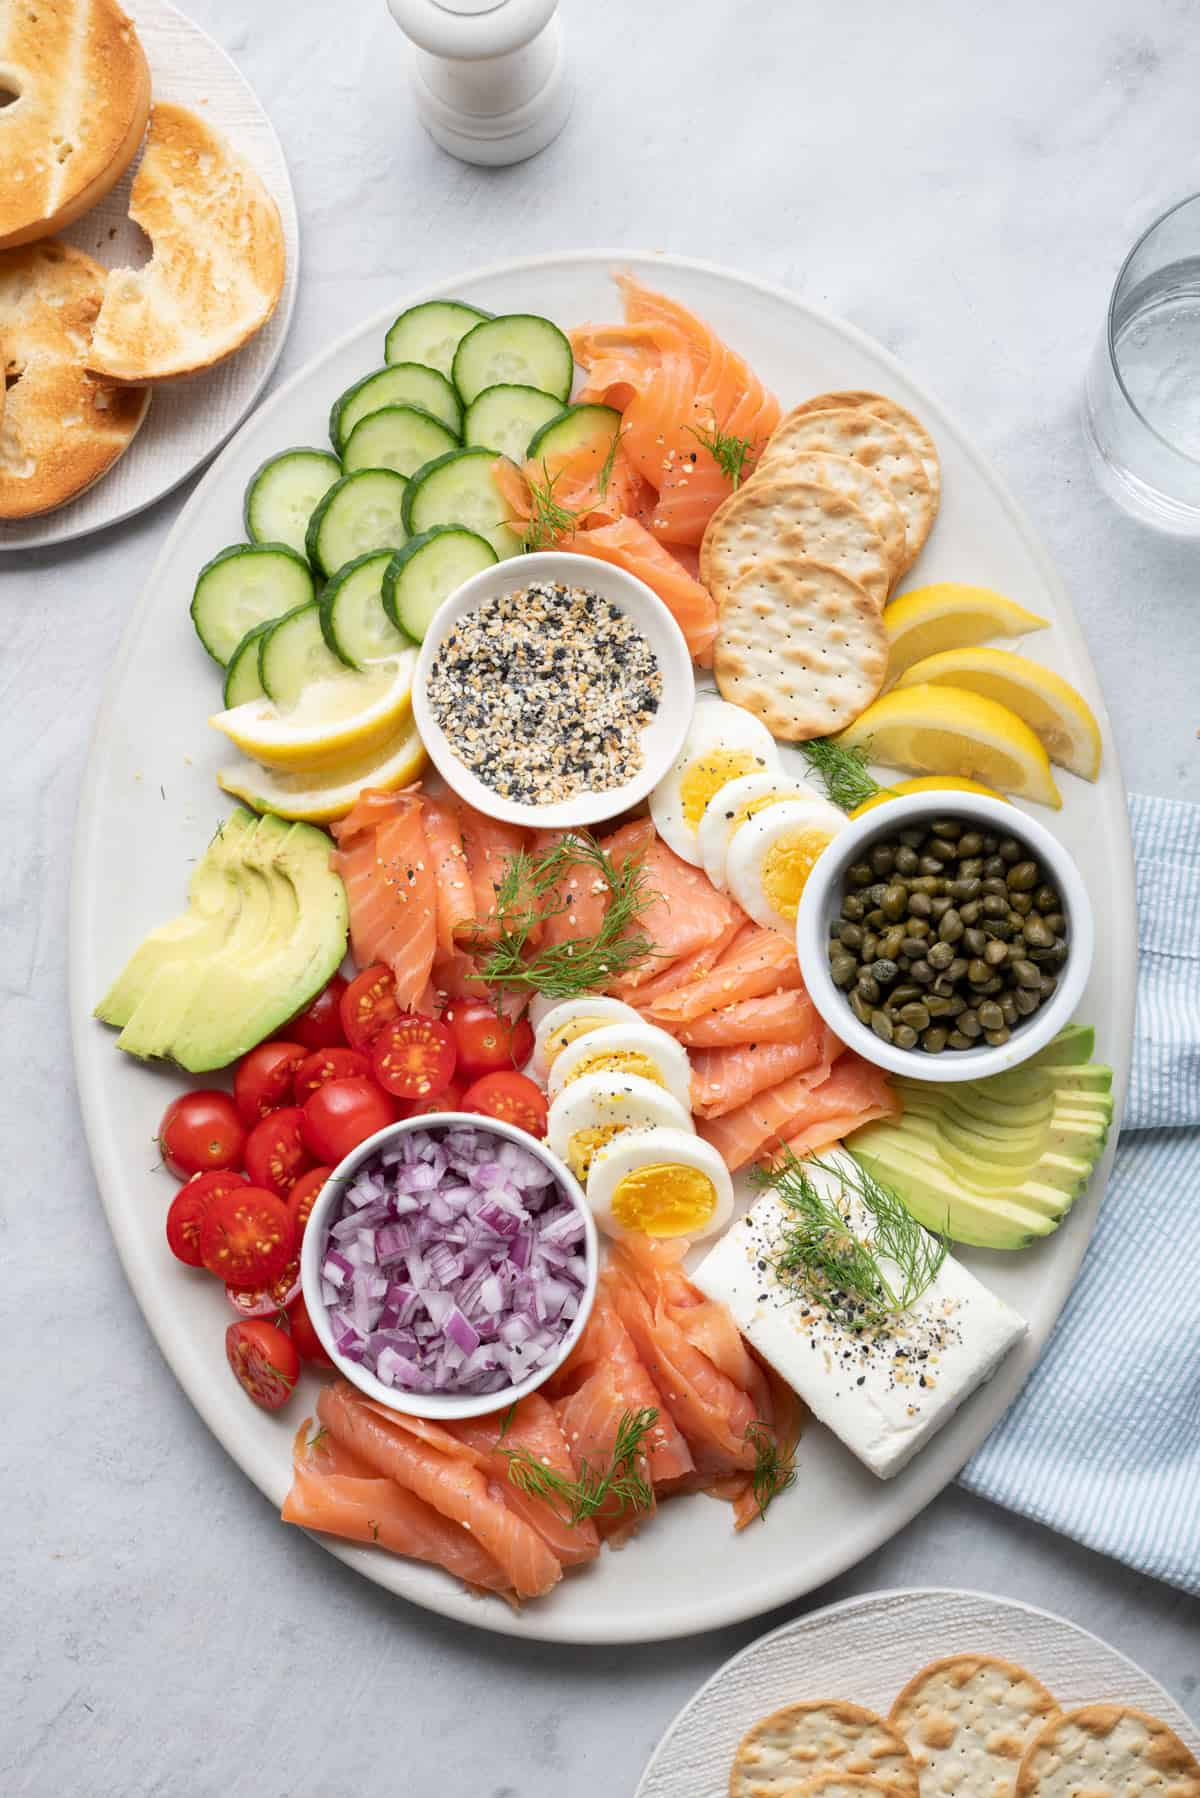 Feel Good Foodie's salmon board presents everything bagel seasoning, crackers, onions, tomatoes, avocado, cream cheese, eggs, and salmon.